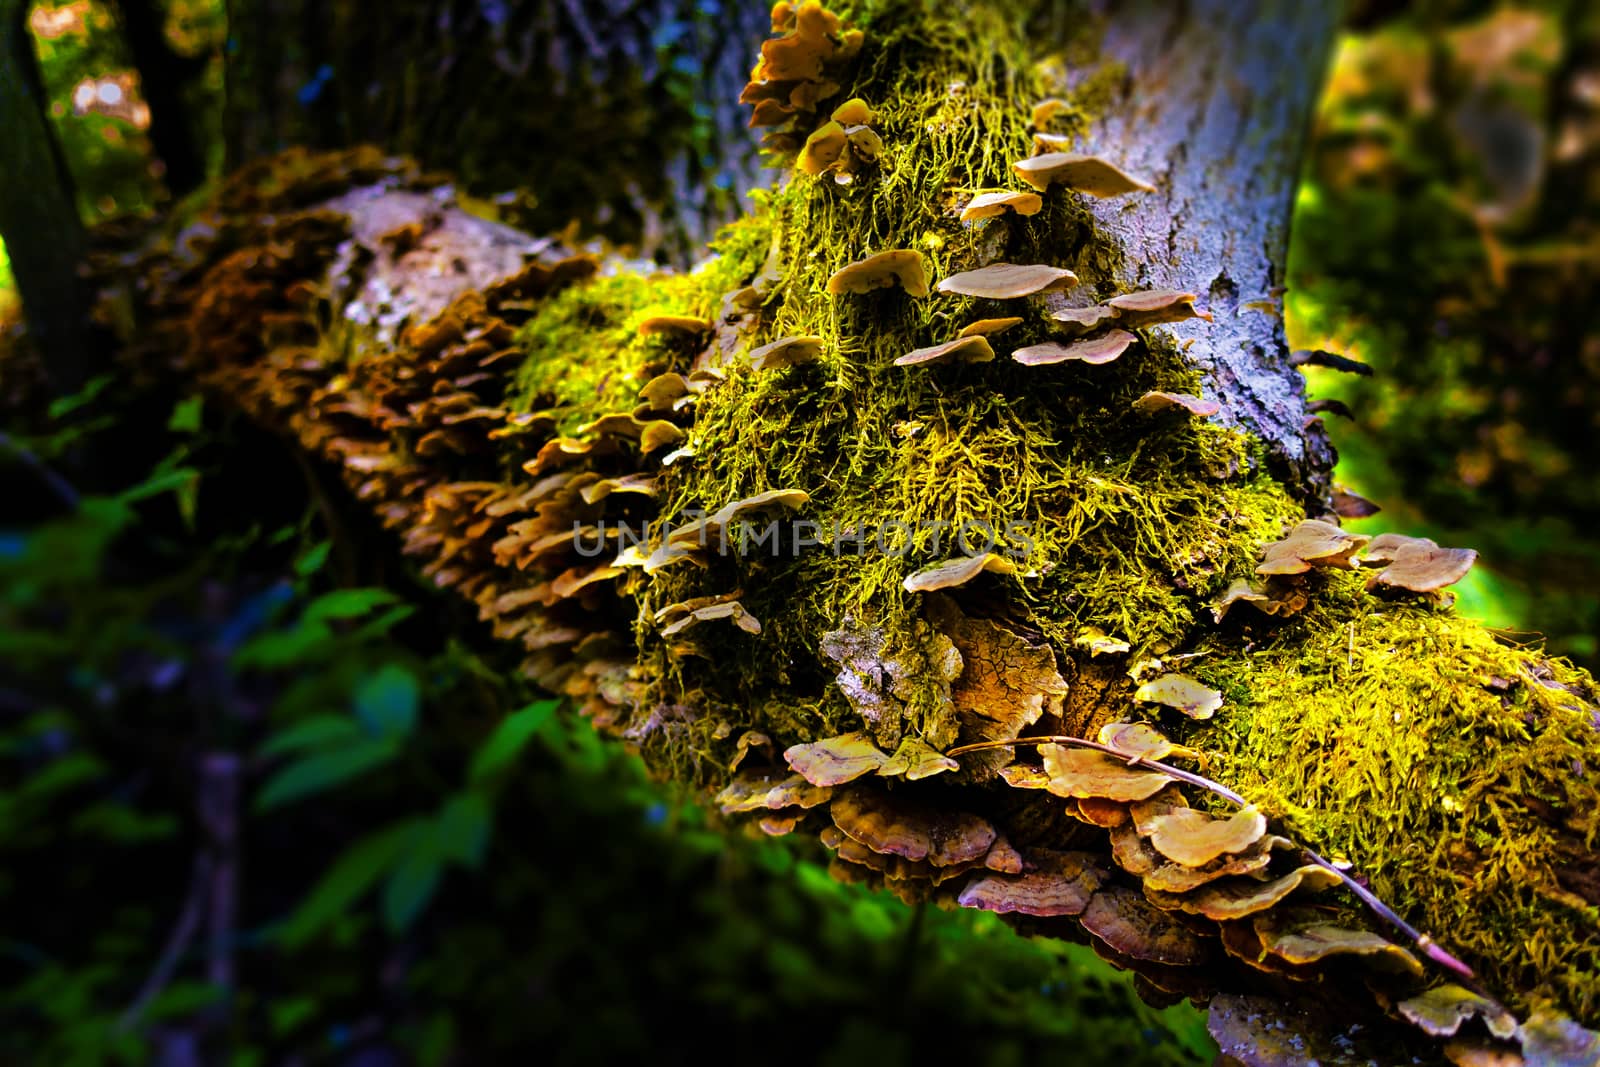 A close up of mushrooms on moss covered tree trunk by asafaric